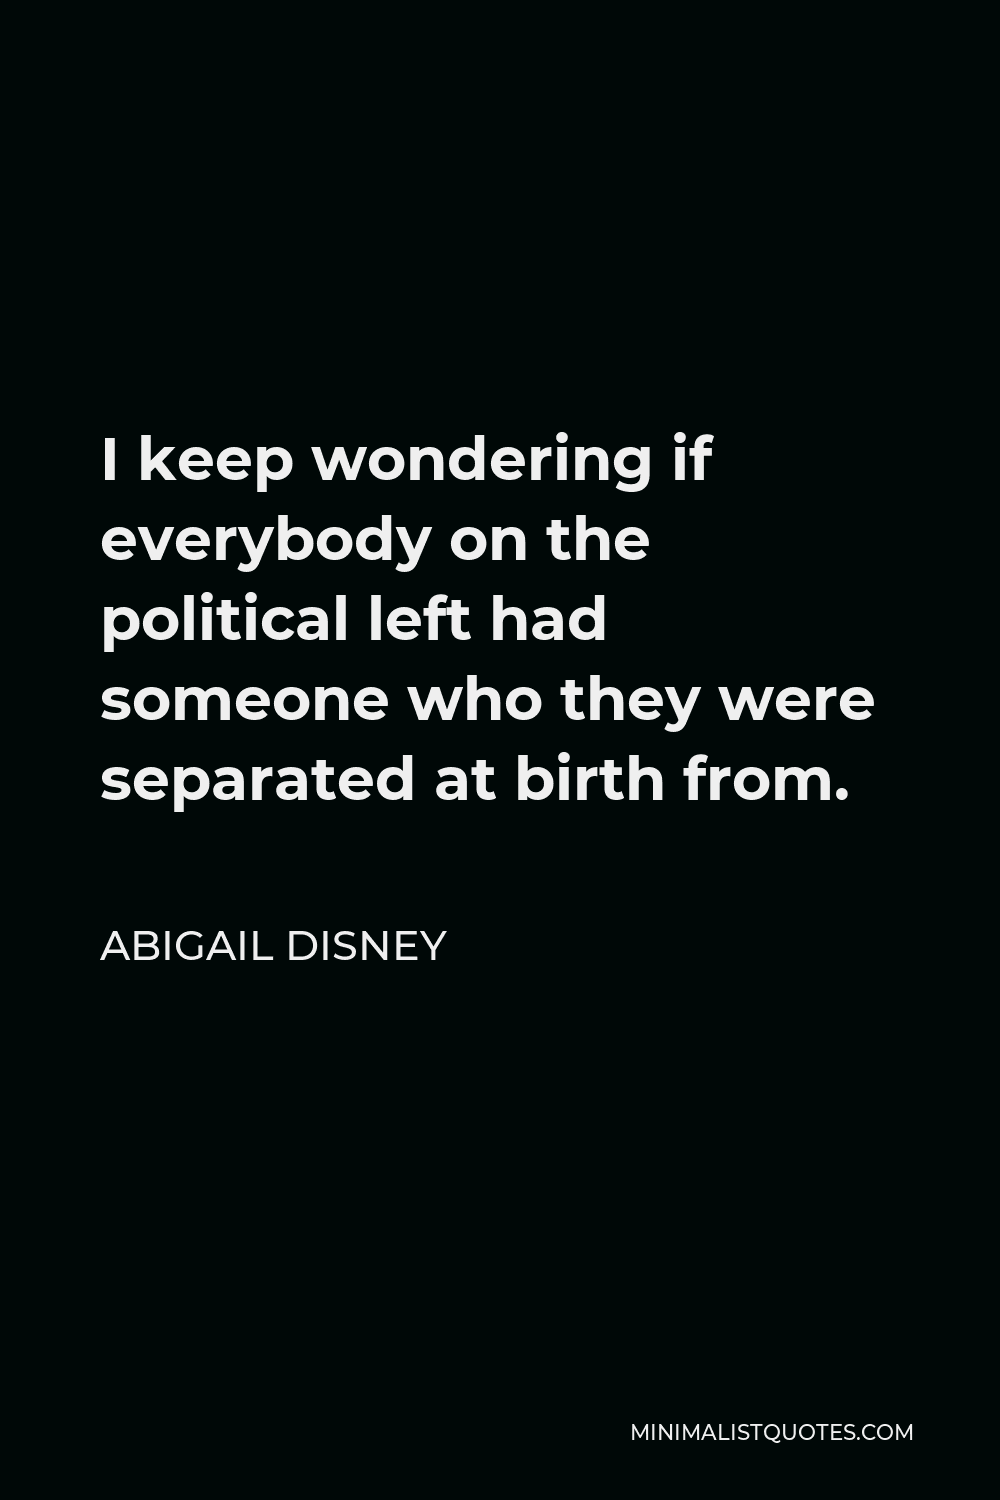 Abigail Disney Quote - I keep wondering if everybody on the political left had someone who they were separated at birth from.